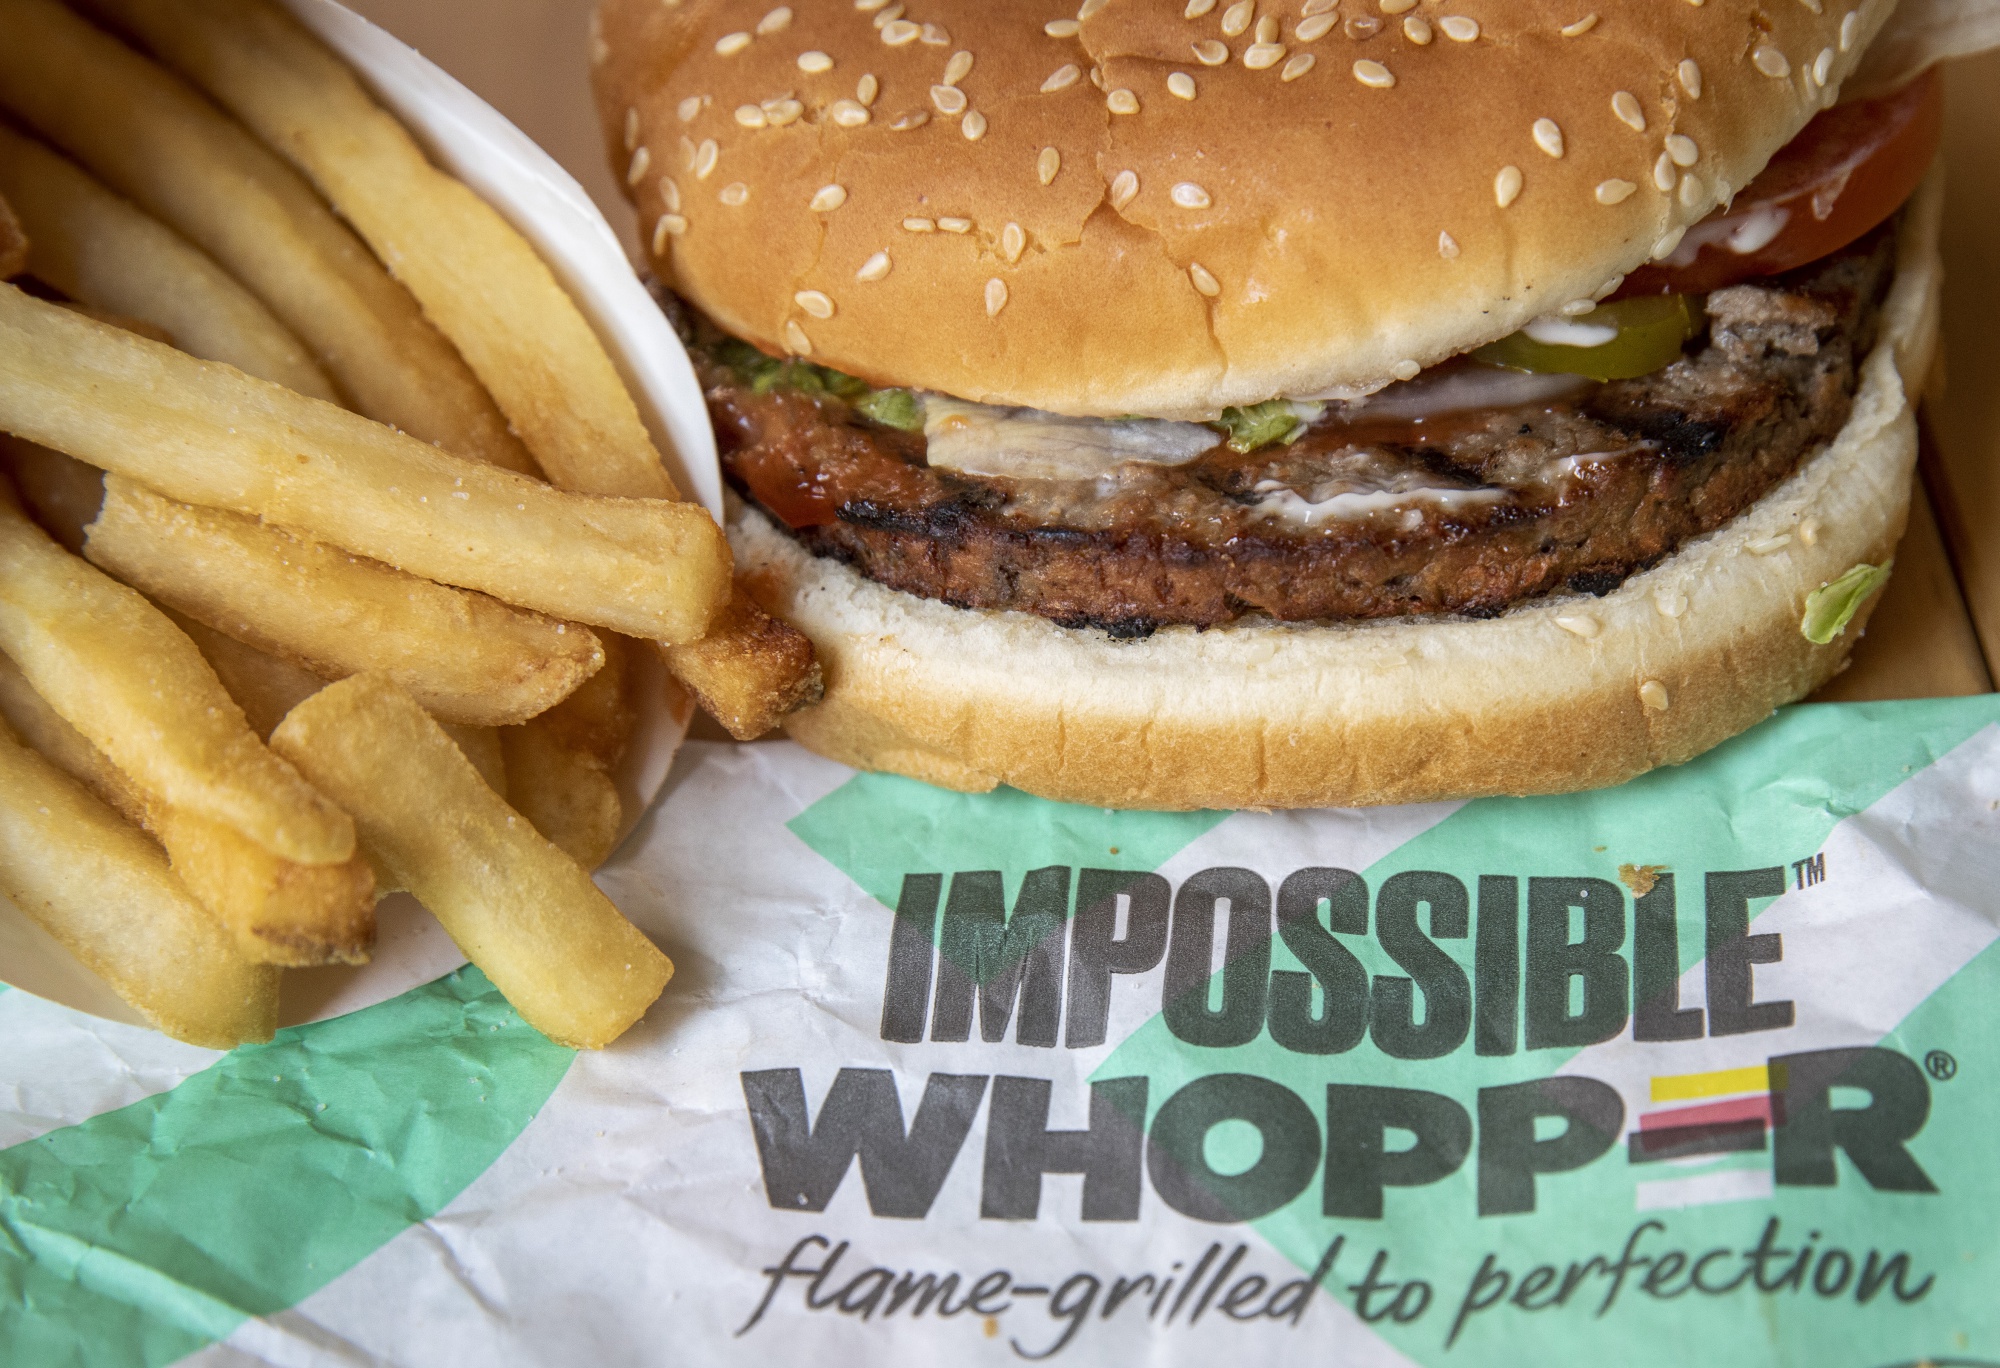 Impossible Whopper Lawsuit Has Real Implications: Opinion - Bloomberg